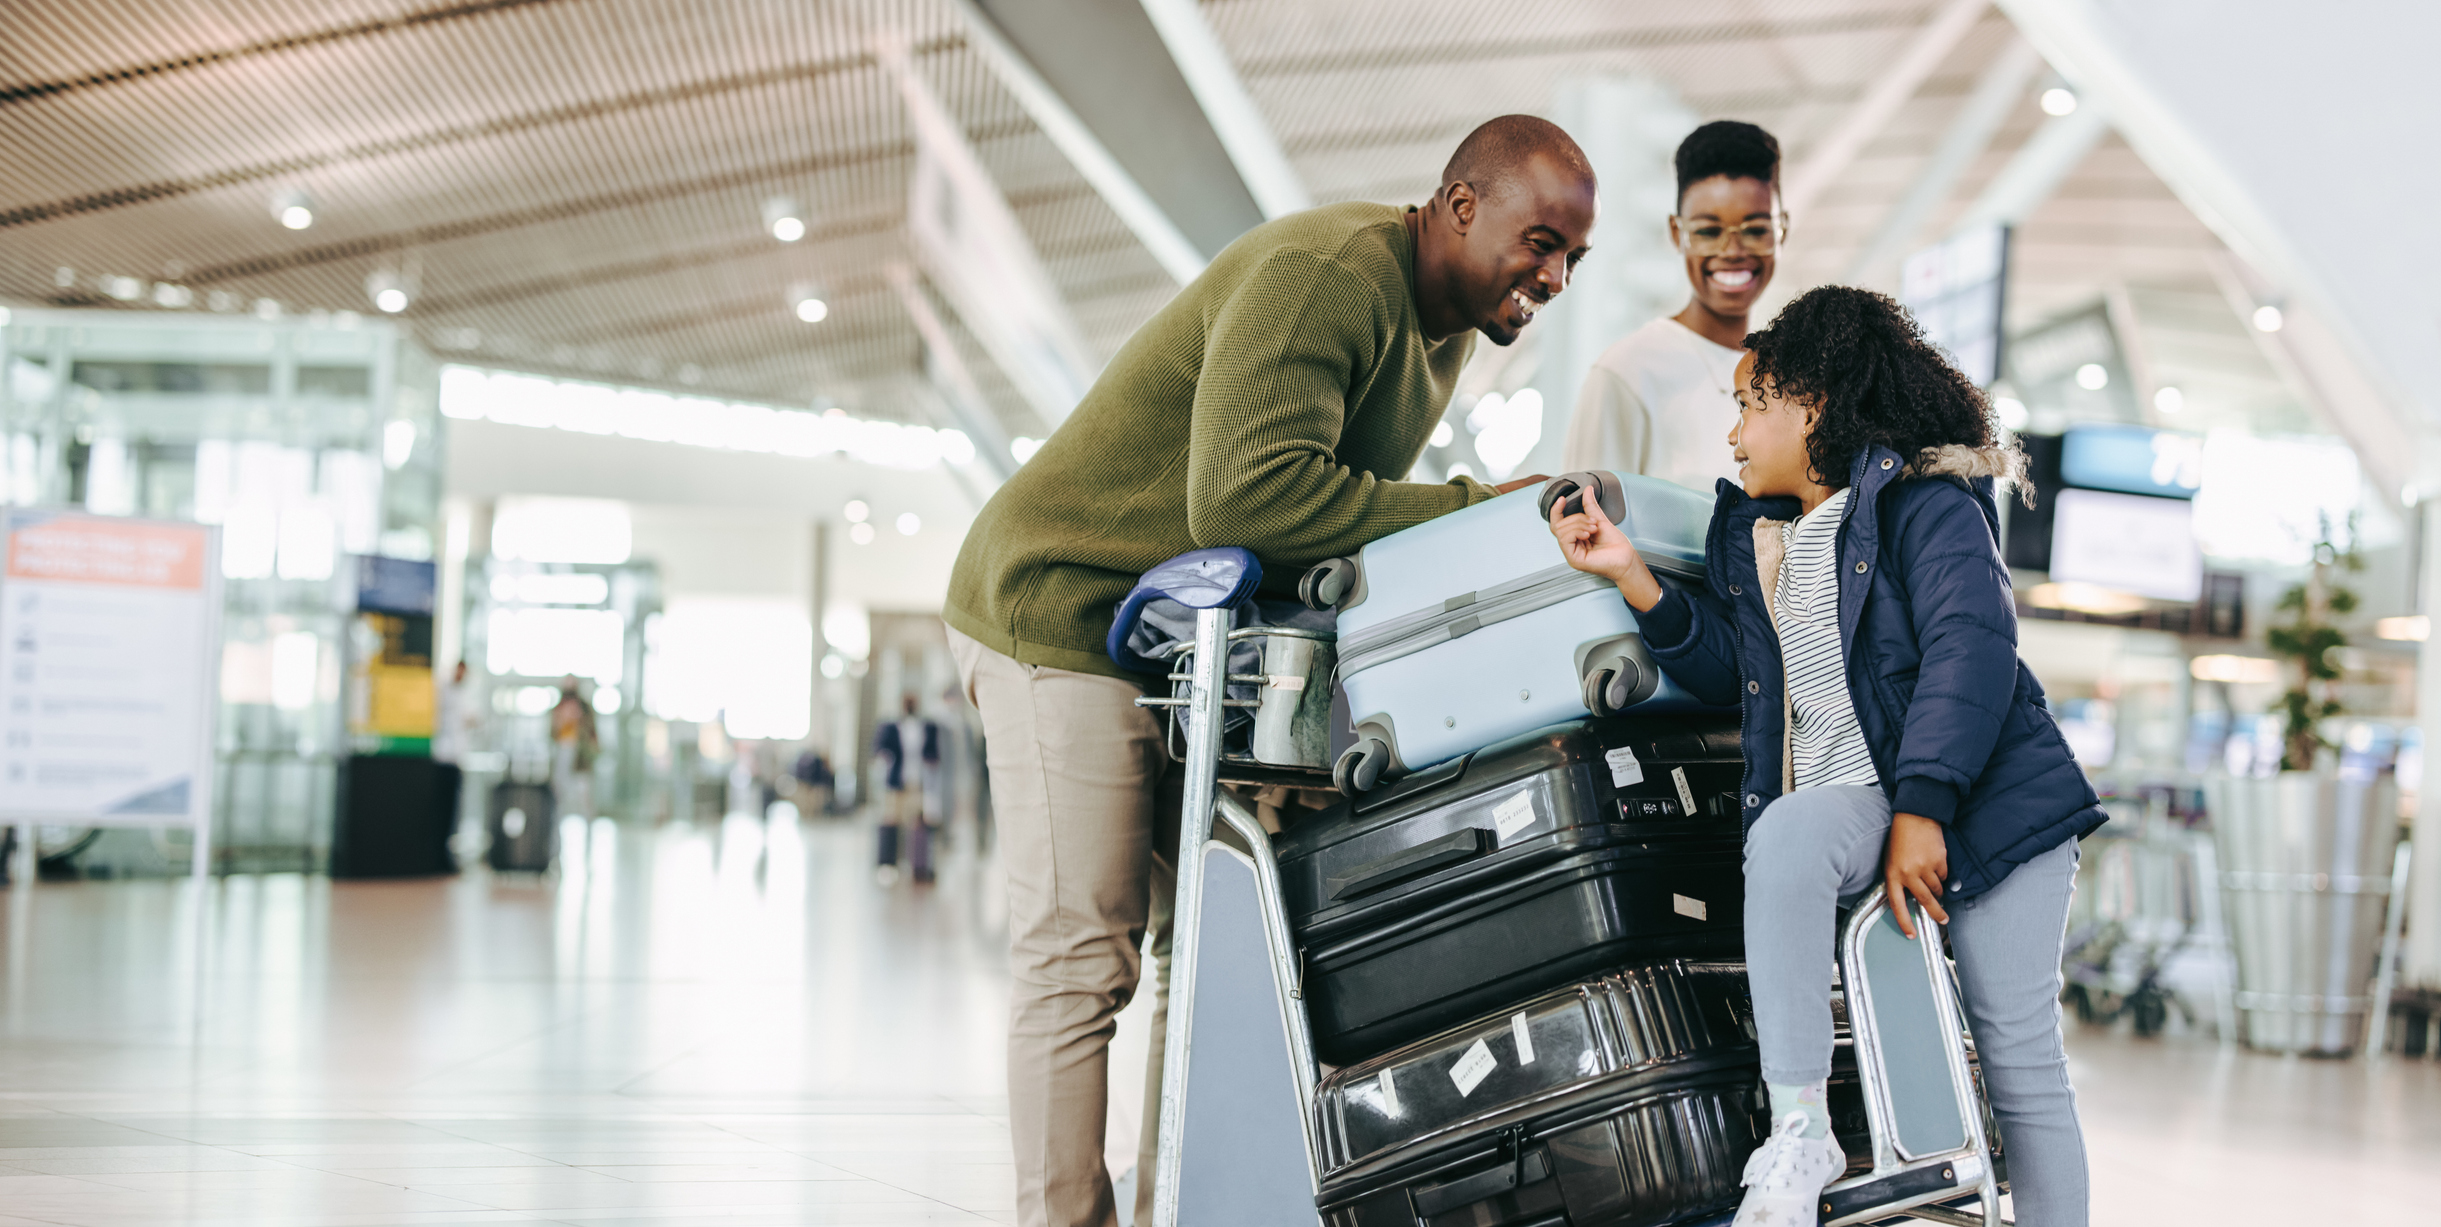 Tips From Black Travel Experts to Make Your Holiday Travel Smoother or Stress-Free